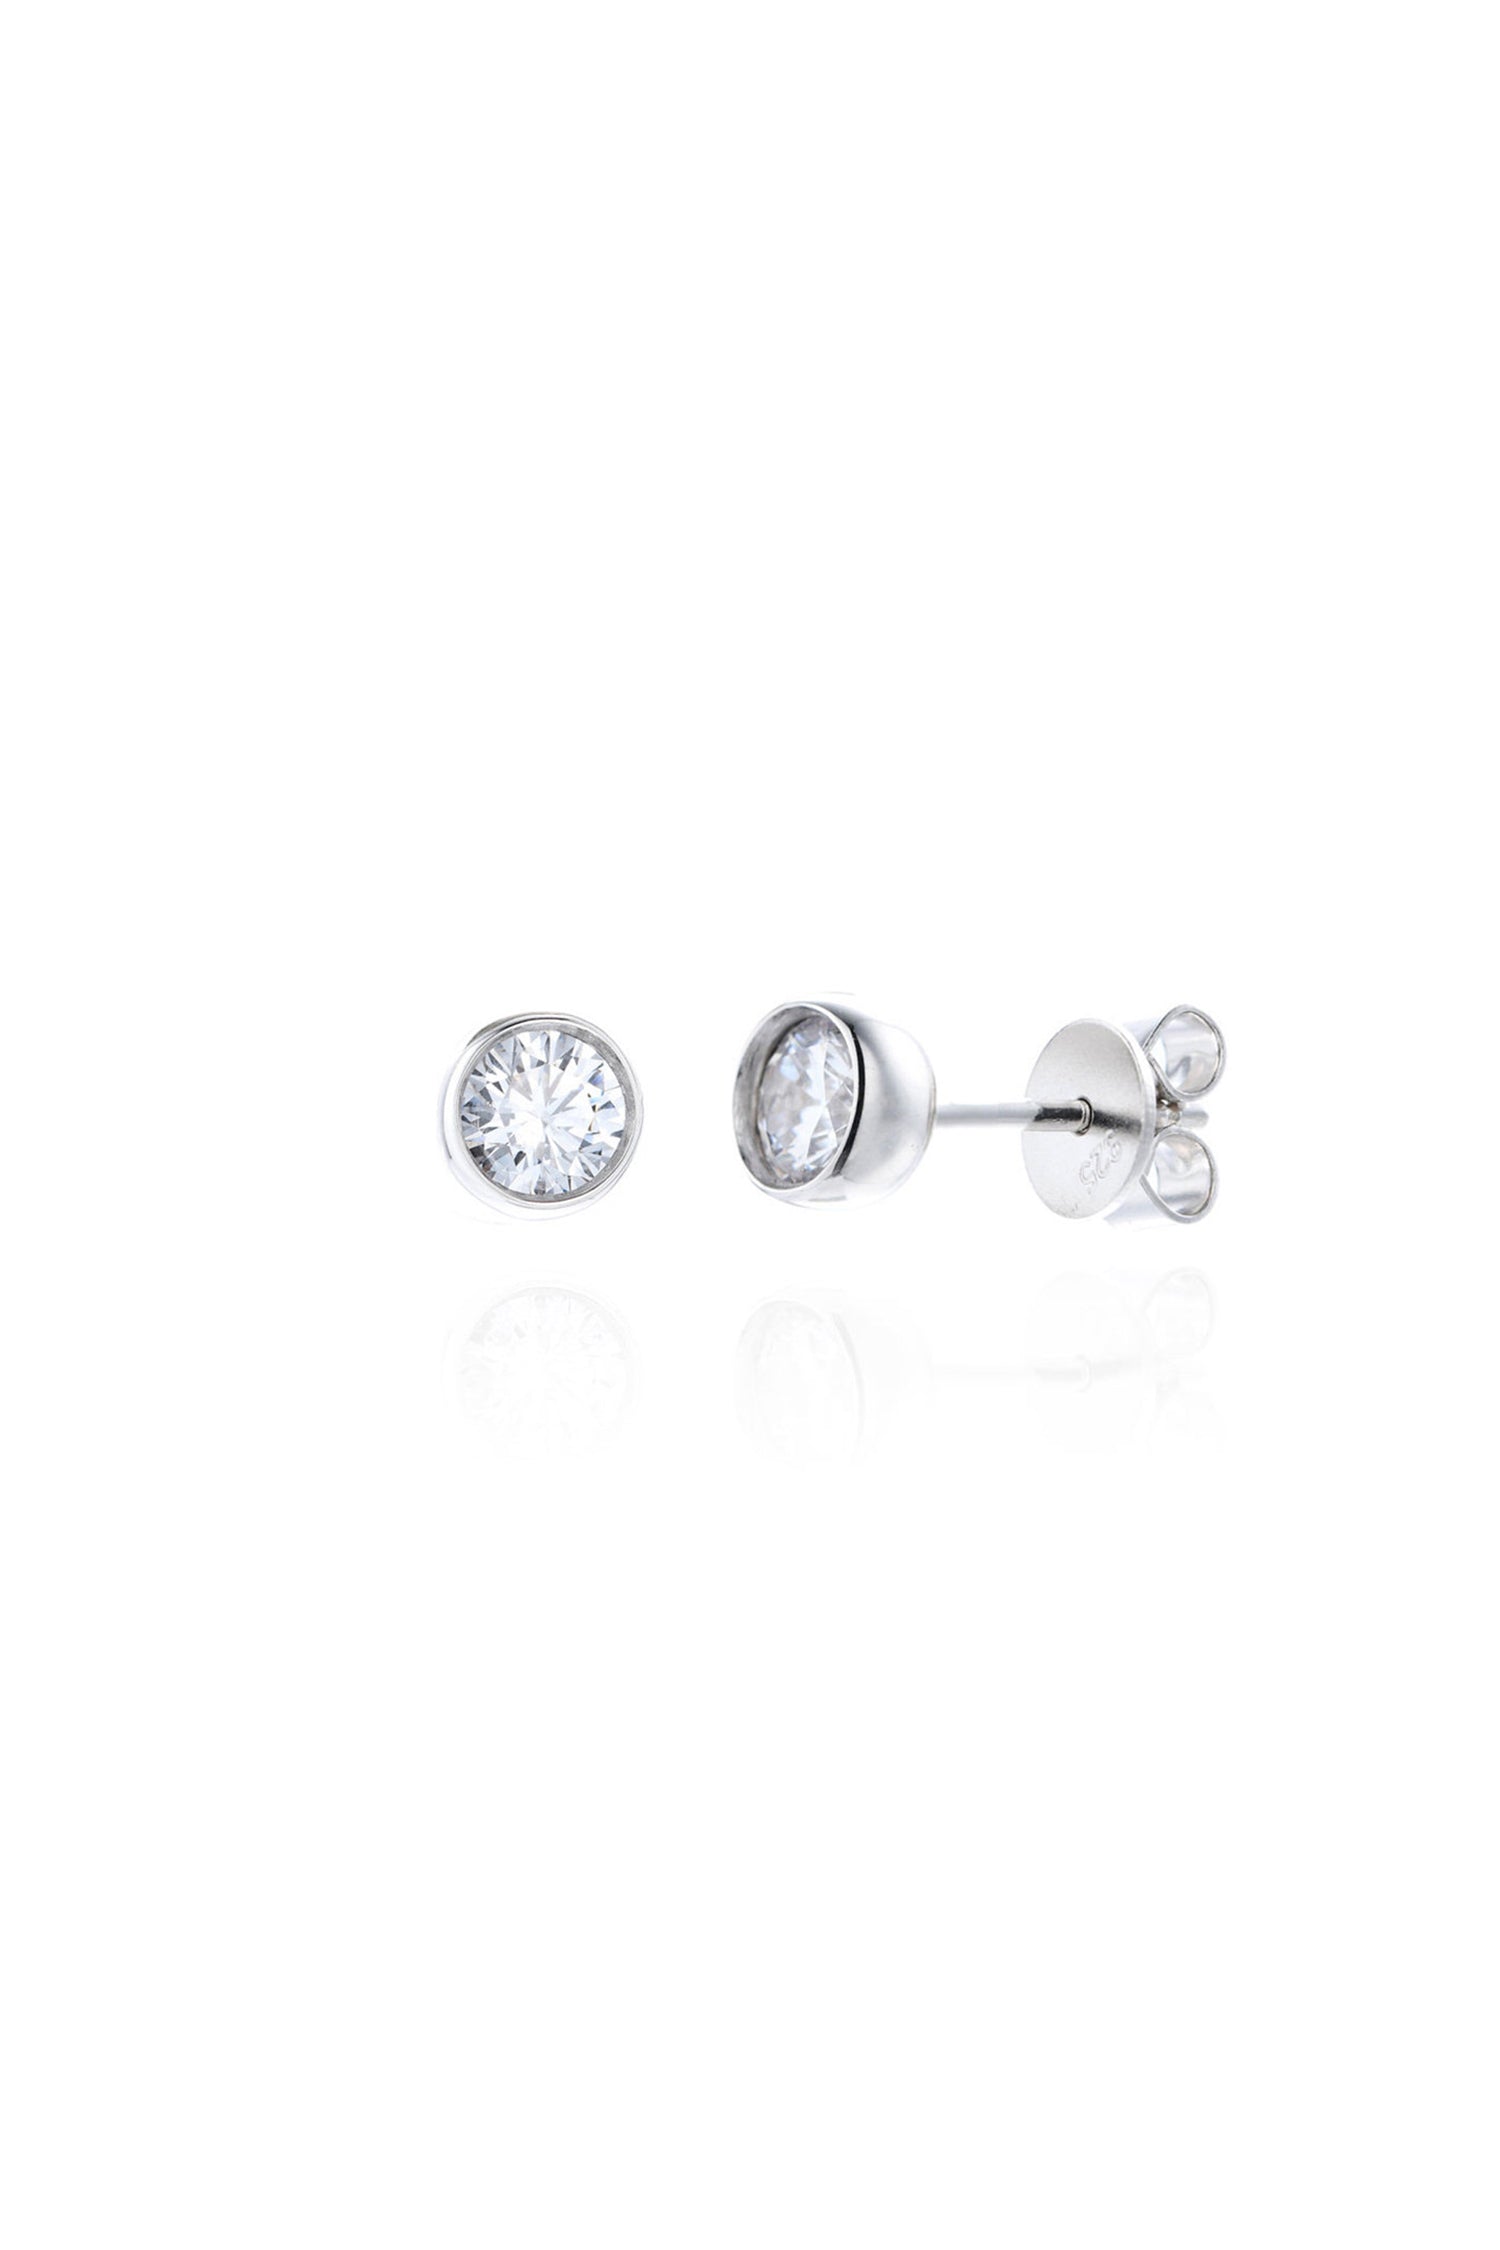  Single Dimaond Cut White Crystal Stud Earrings Sterling Silver White Background